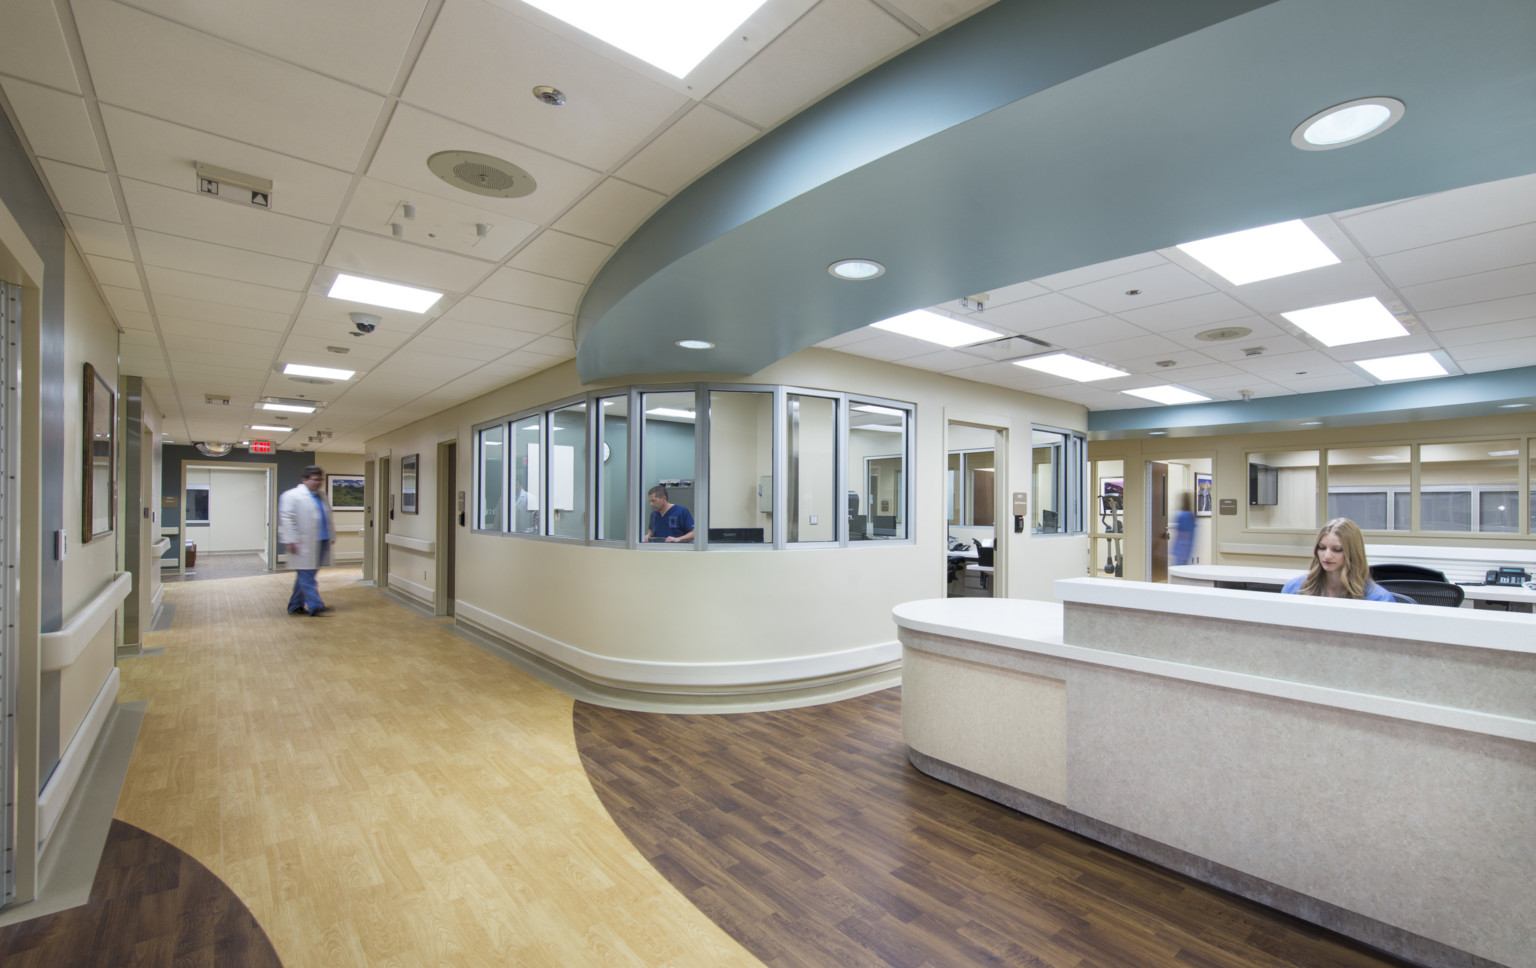 Hospital with wood flooring and neutral walls. Blue ceiling soffit curves over public walkway lined with glass front offices.